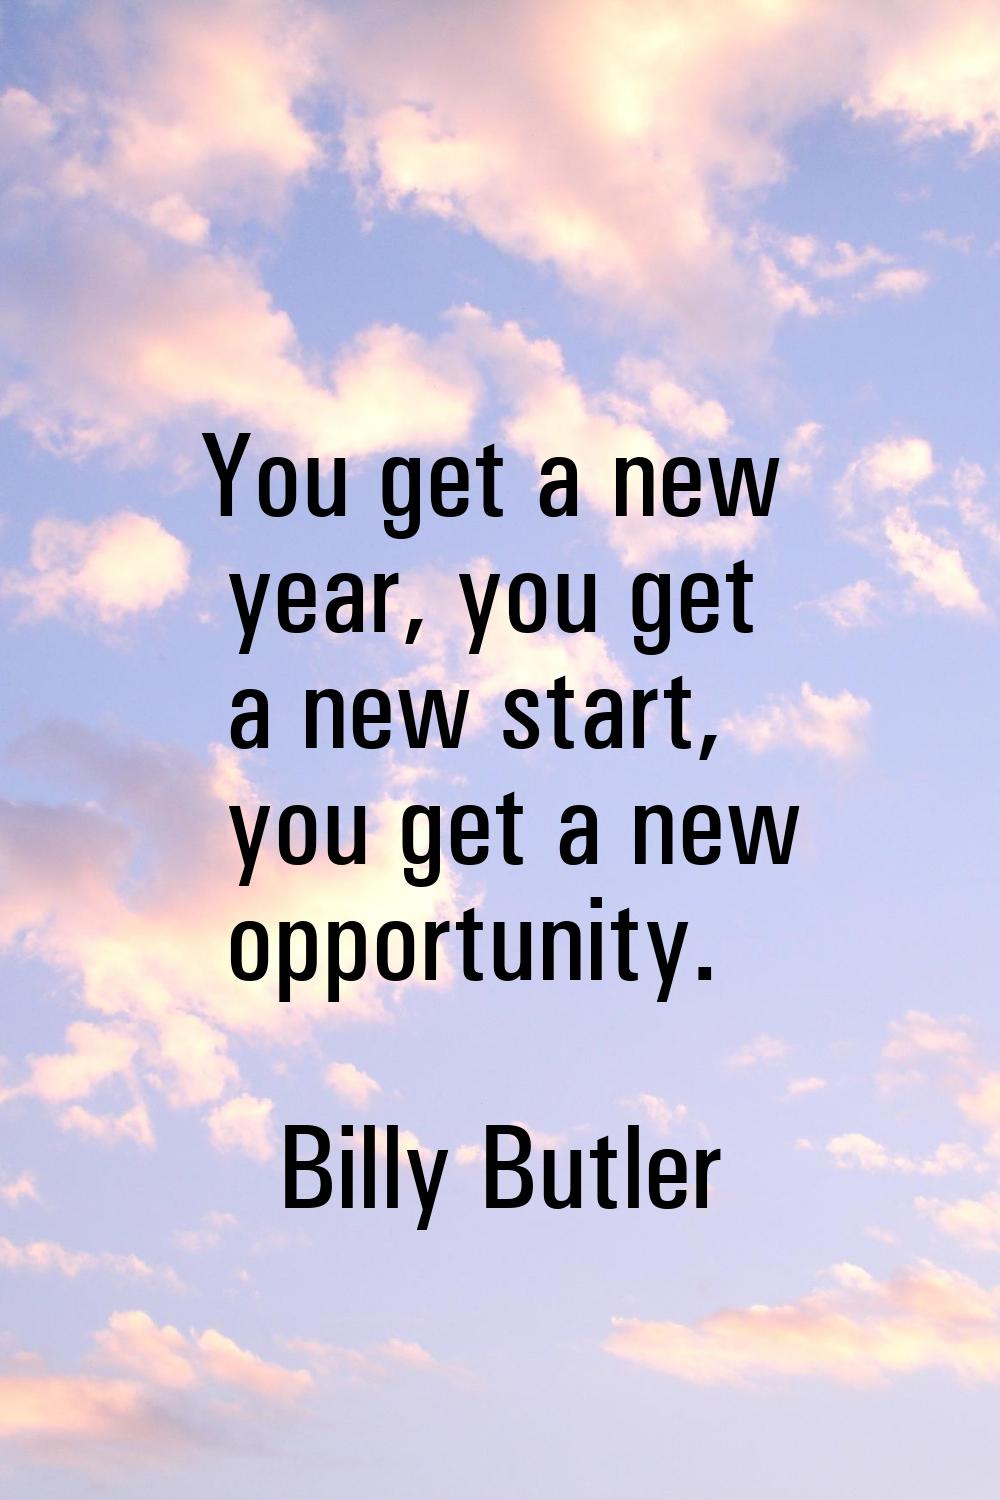 You get a new year, you get a new start, you get a new opportunity.